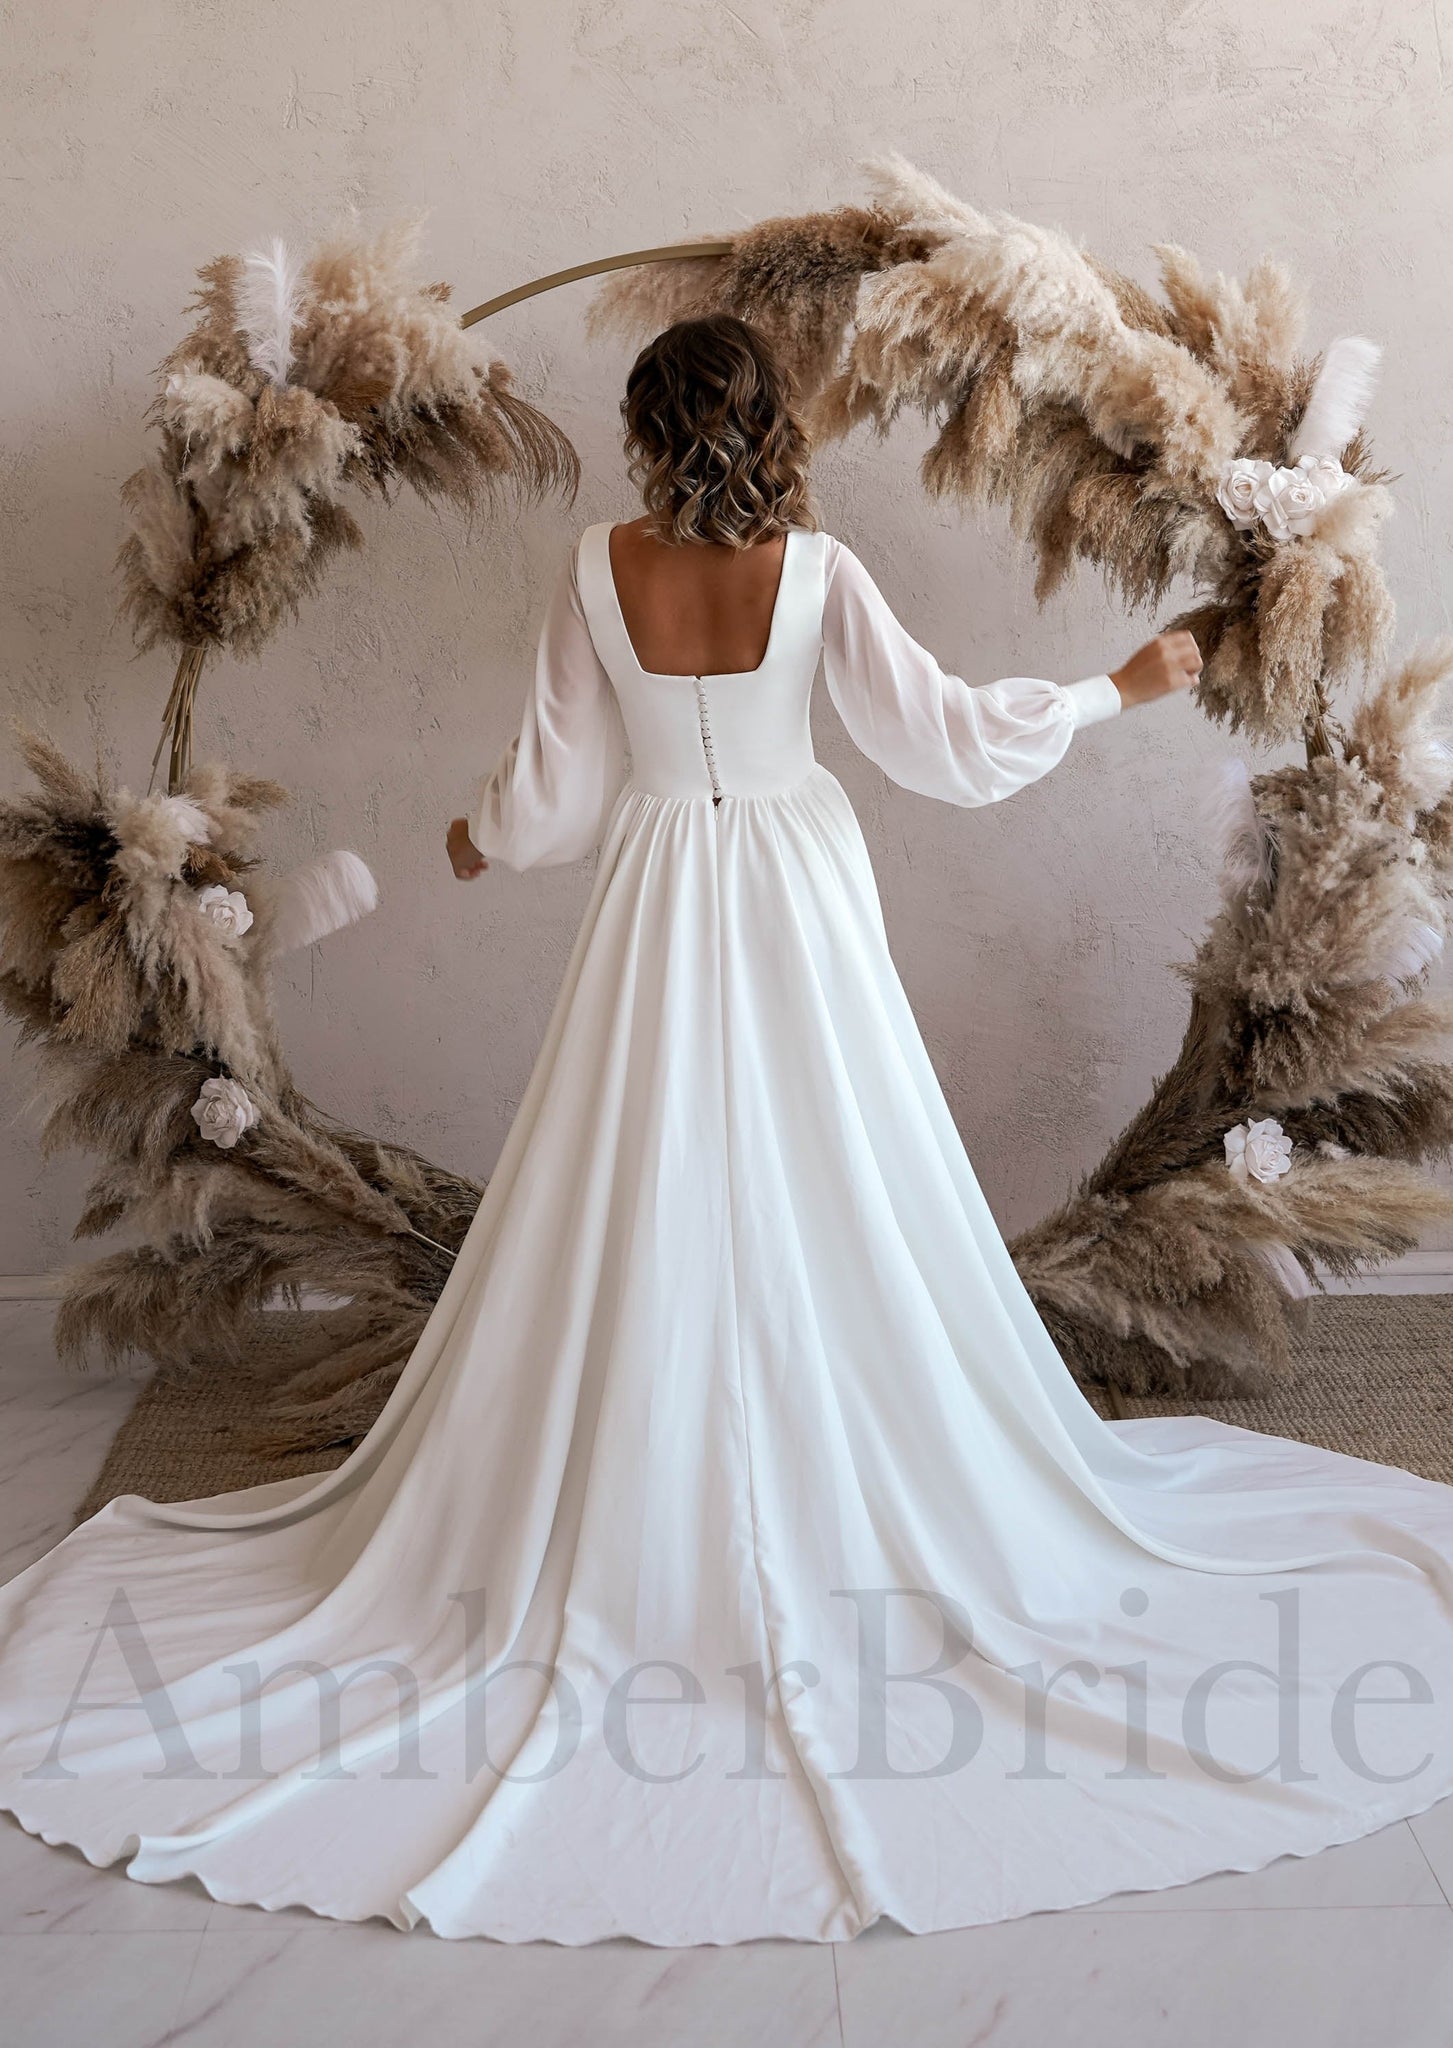 Simple A Line Chiffon Wedding Dress with Square Neck and Puffy Sleeves